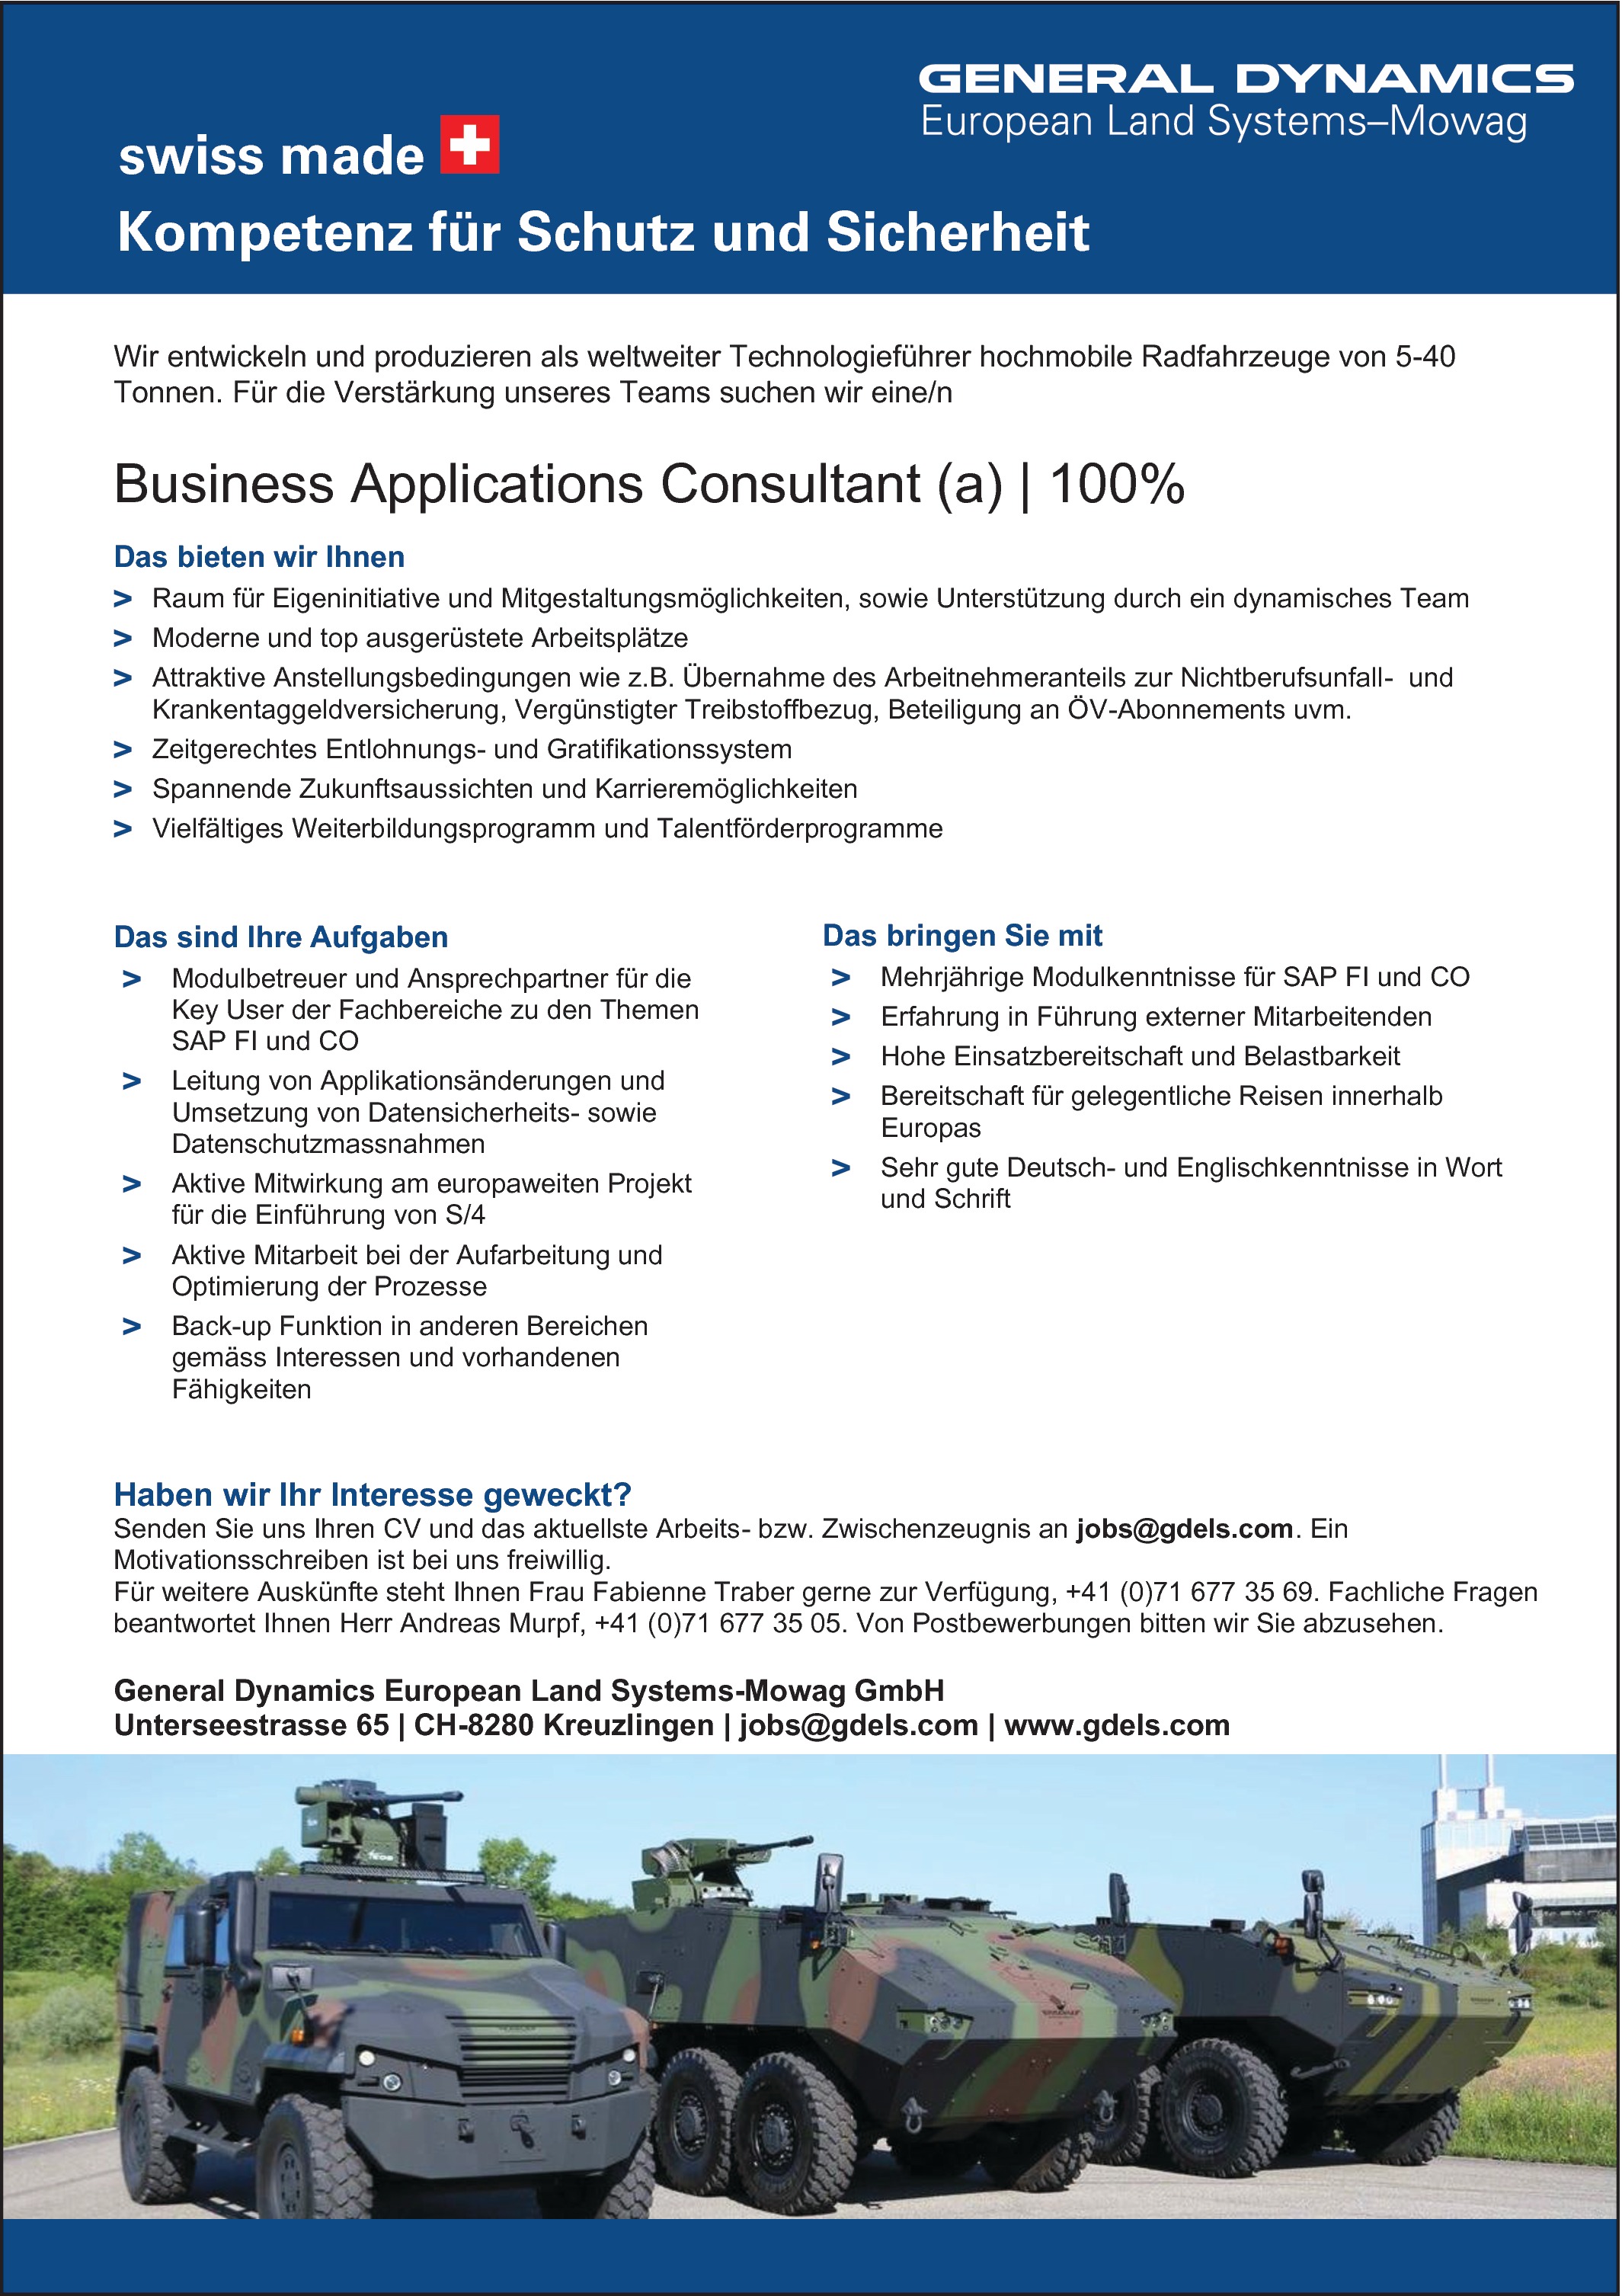 Business Applications Consultant (a) 